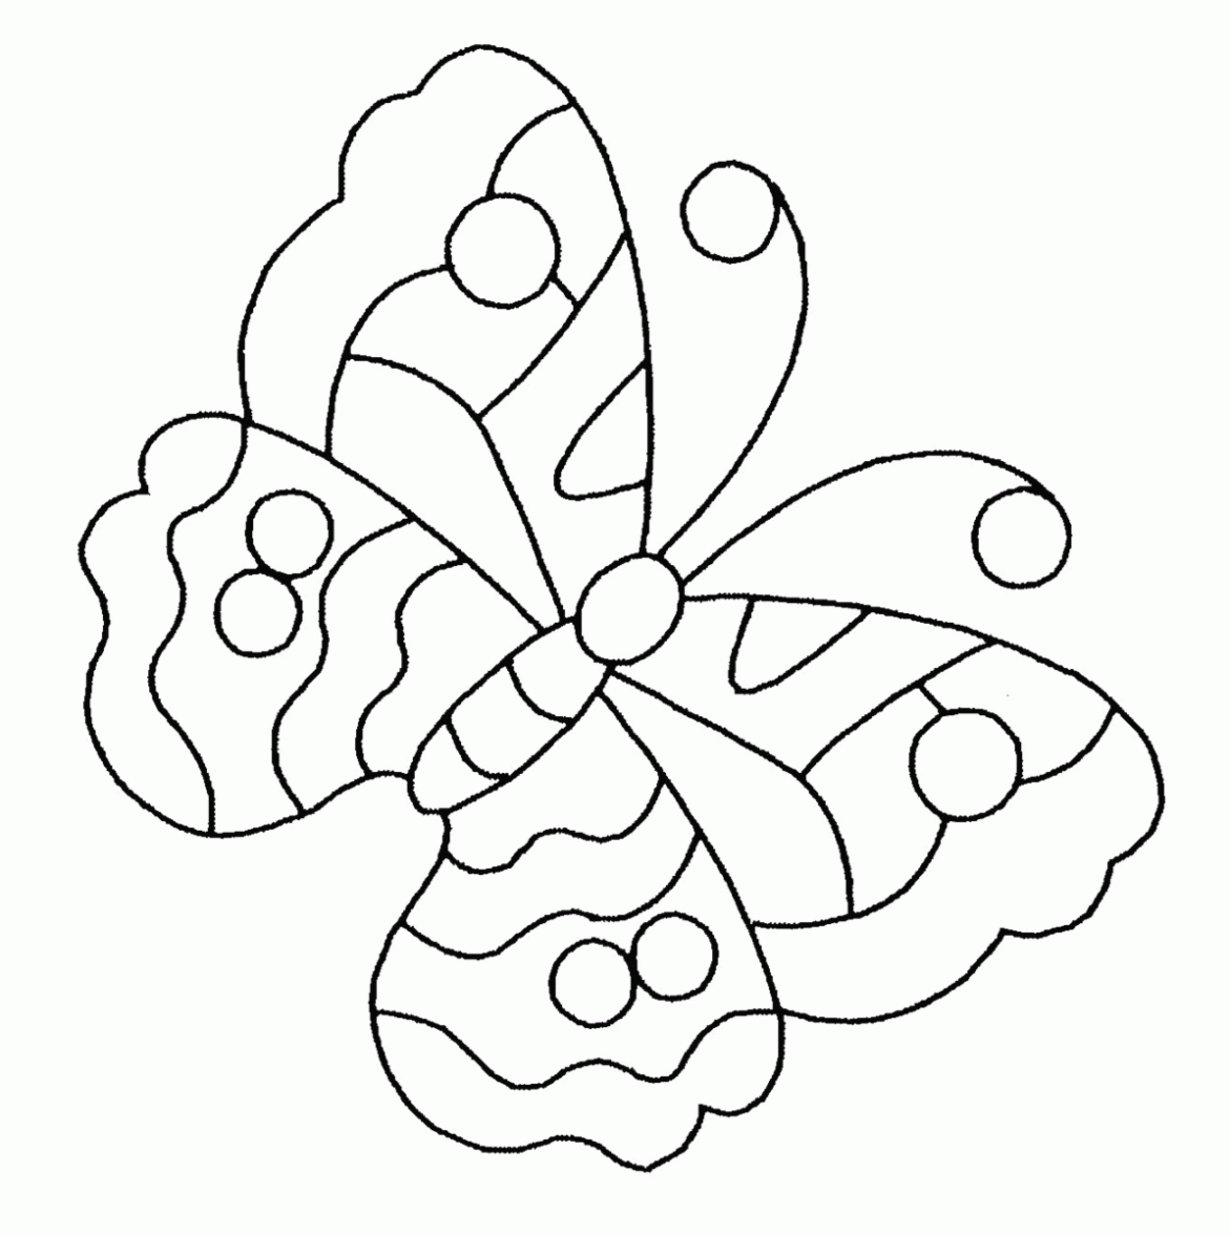 printable butterfly coloring page free printable butterfly coloring pages for kids butterfly coloring printable page 